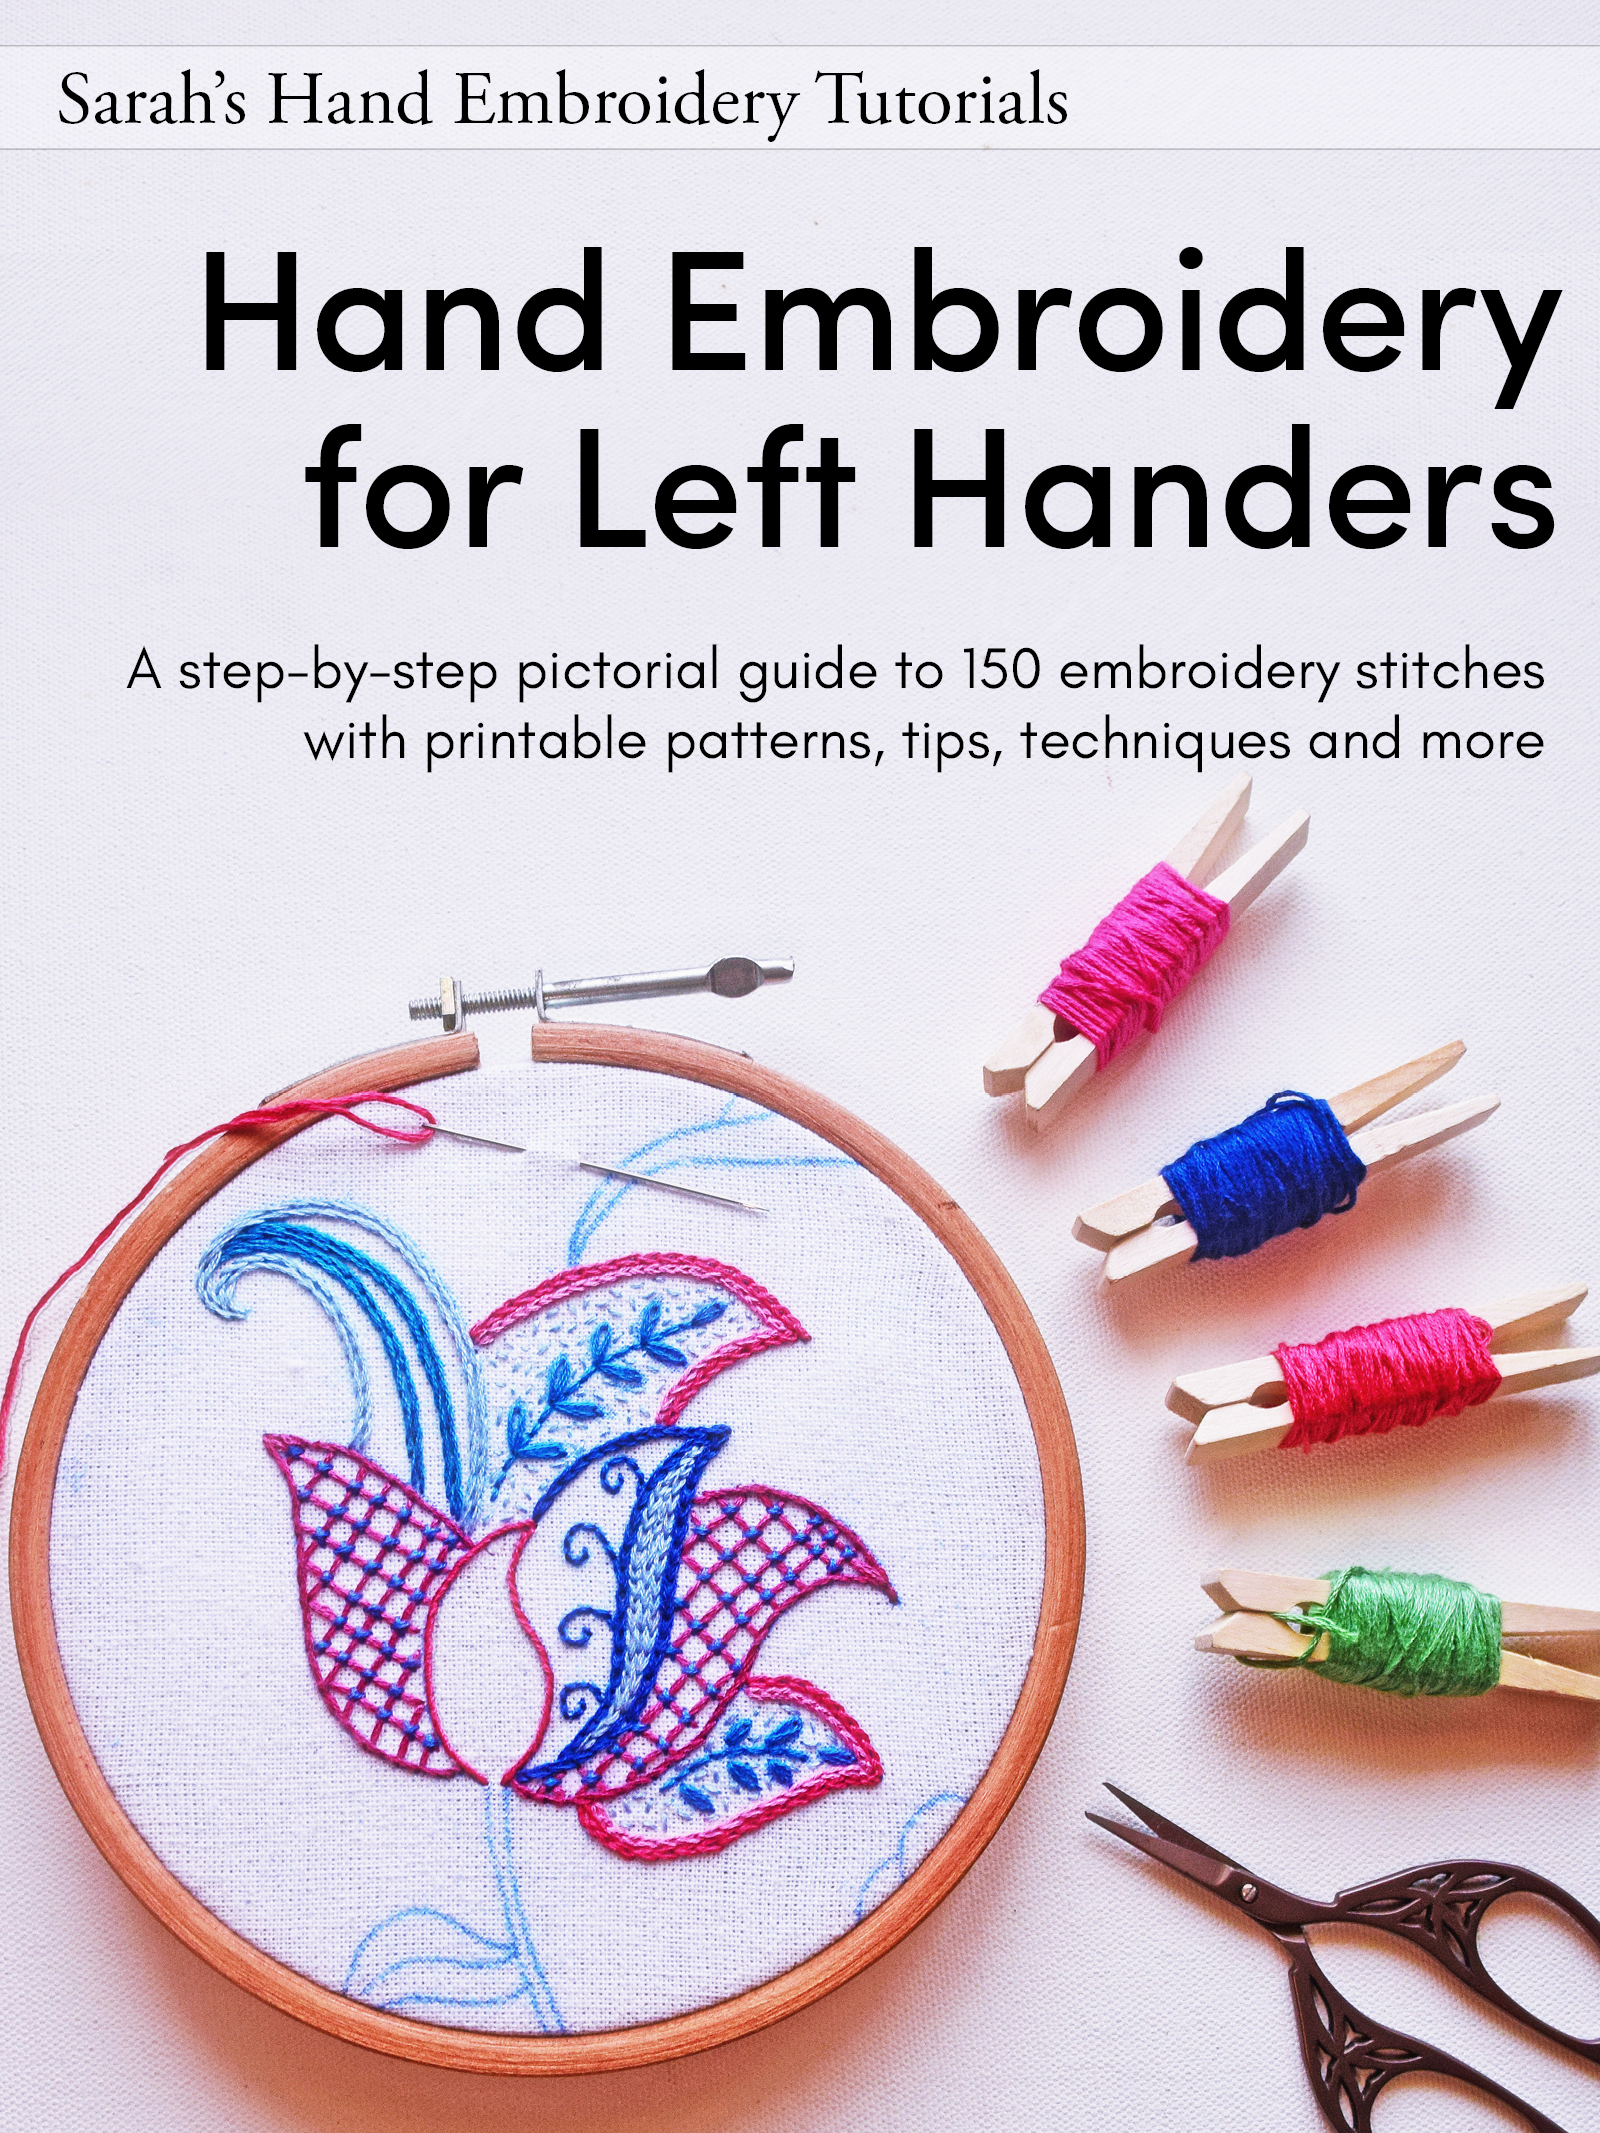 12 Roses for Hand Embroidery: A step-by-step pictorial project guide to  stitch roses using various hand embroidery stitches. (Sarah's Hand  Embroidery